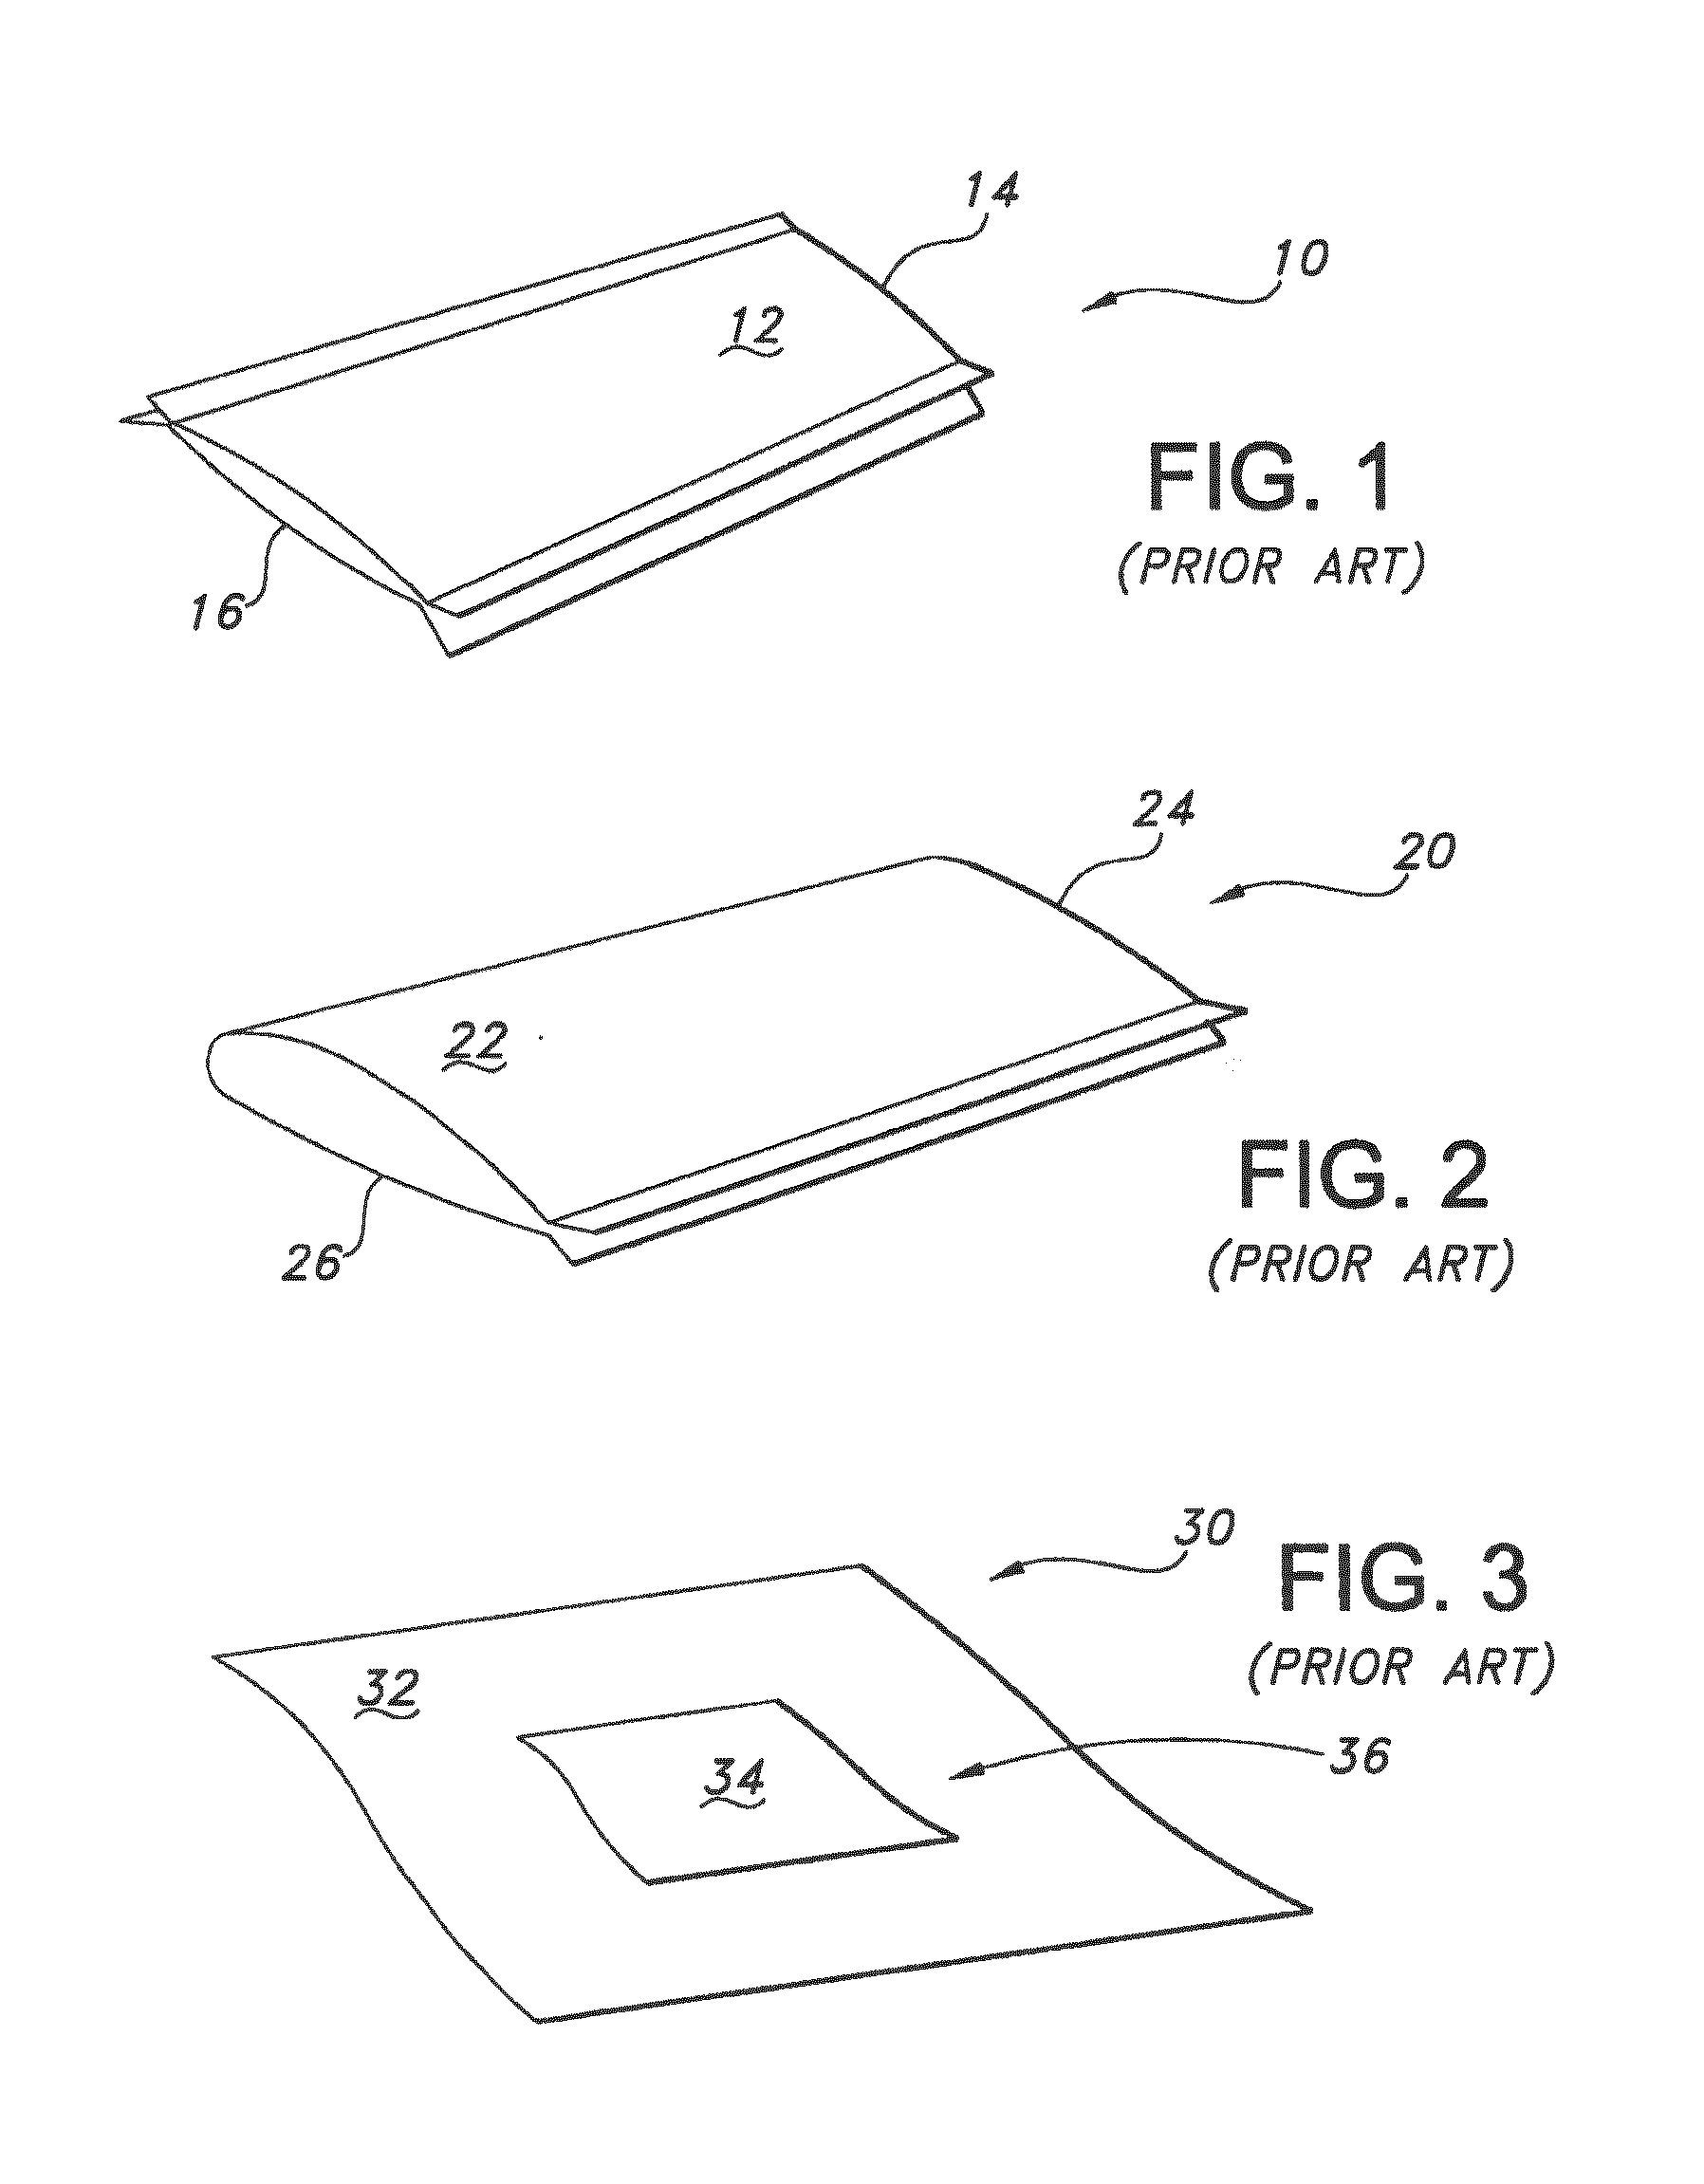 Flexible Multi-Panel Sterilization Assembly With Mass Balancing Side Tabs